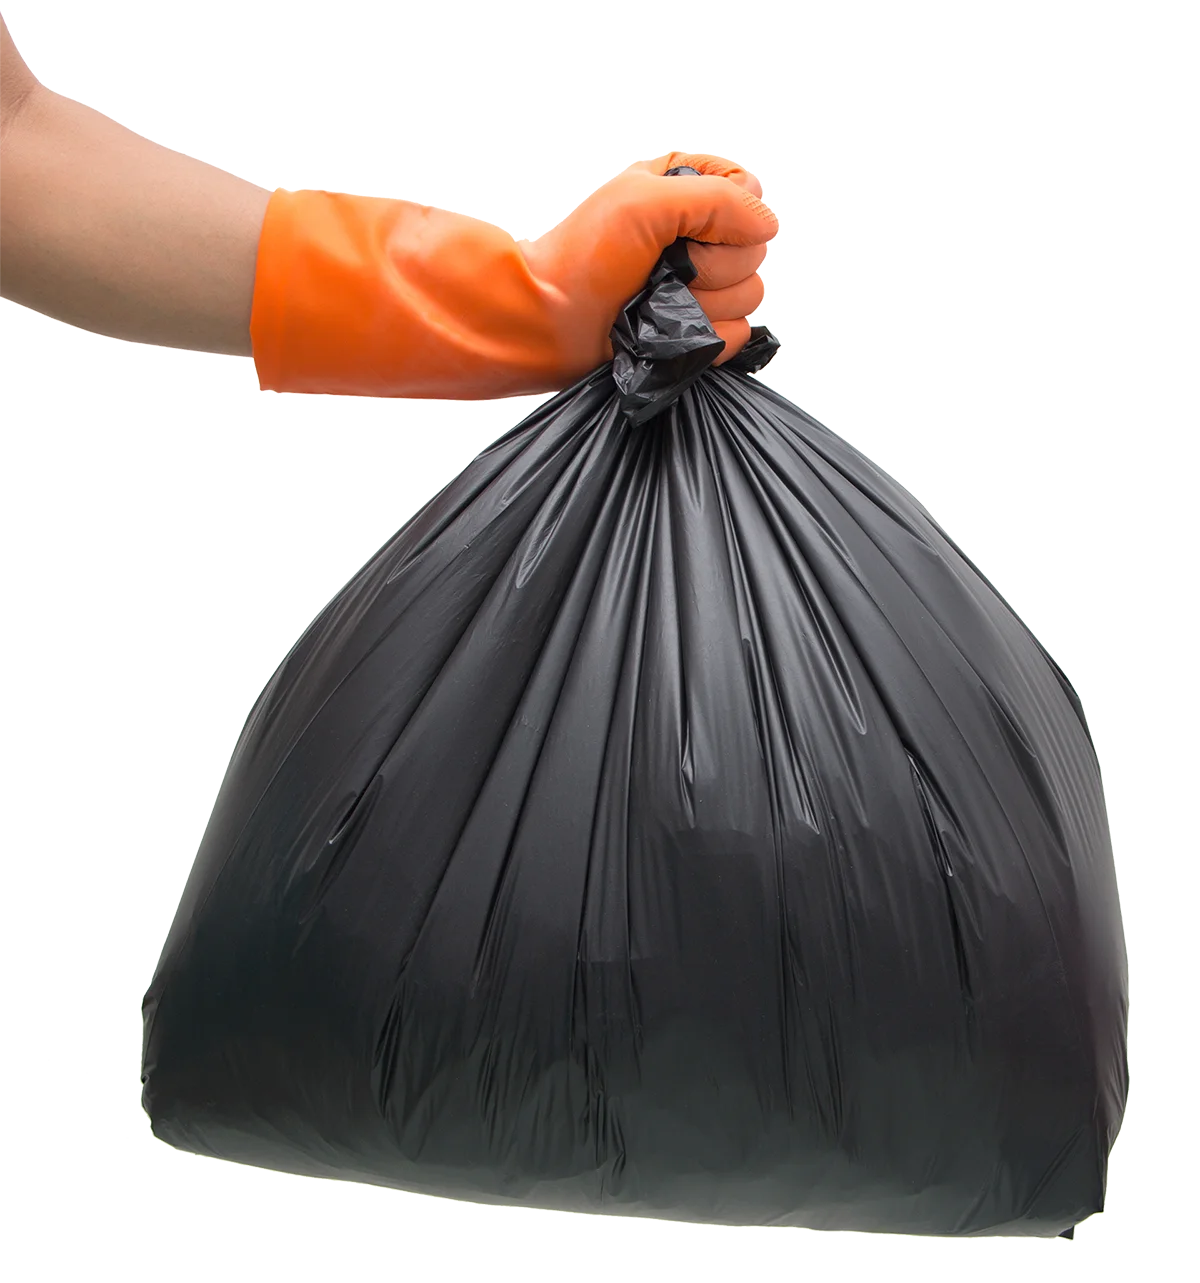 RWS provides you with a free valet trash service proposal near you that is tailored to the needs of your unique property.